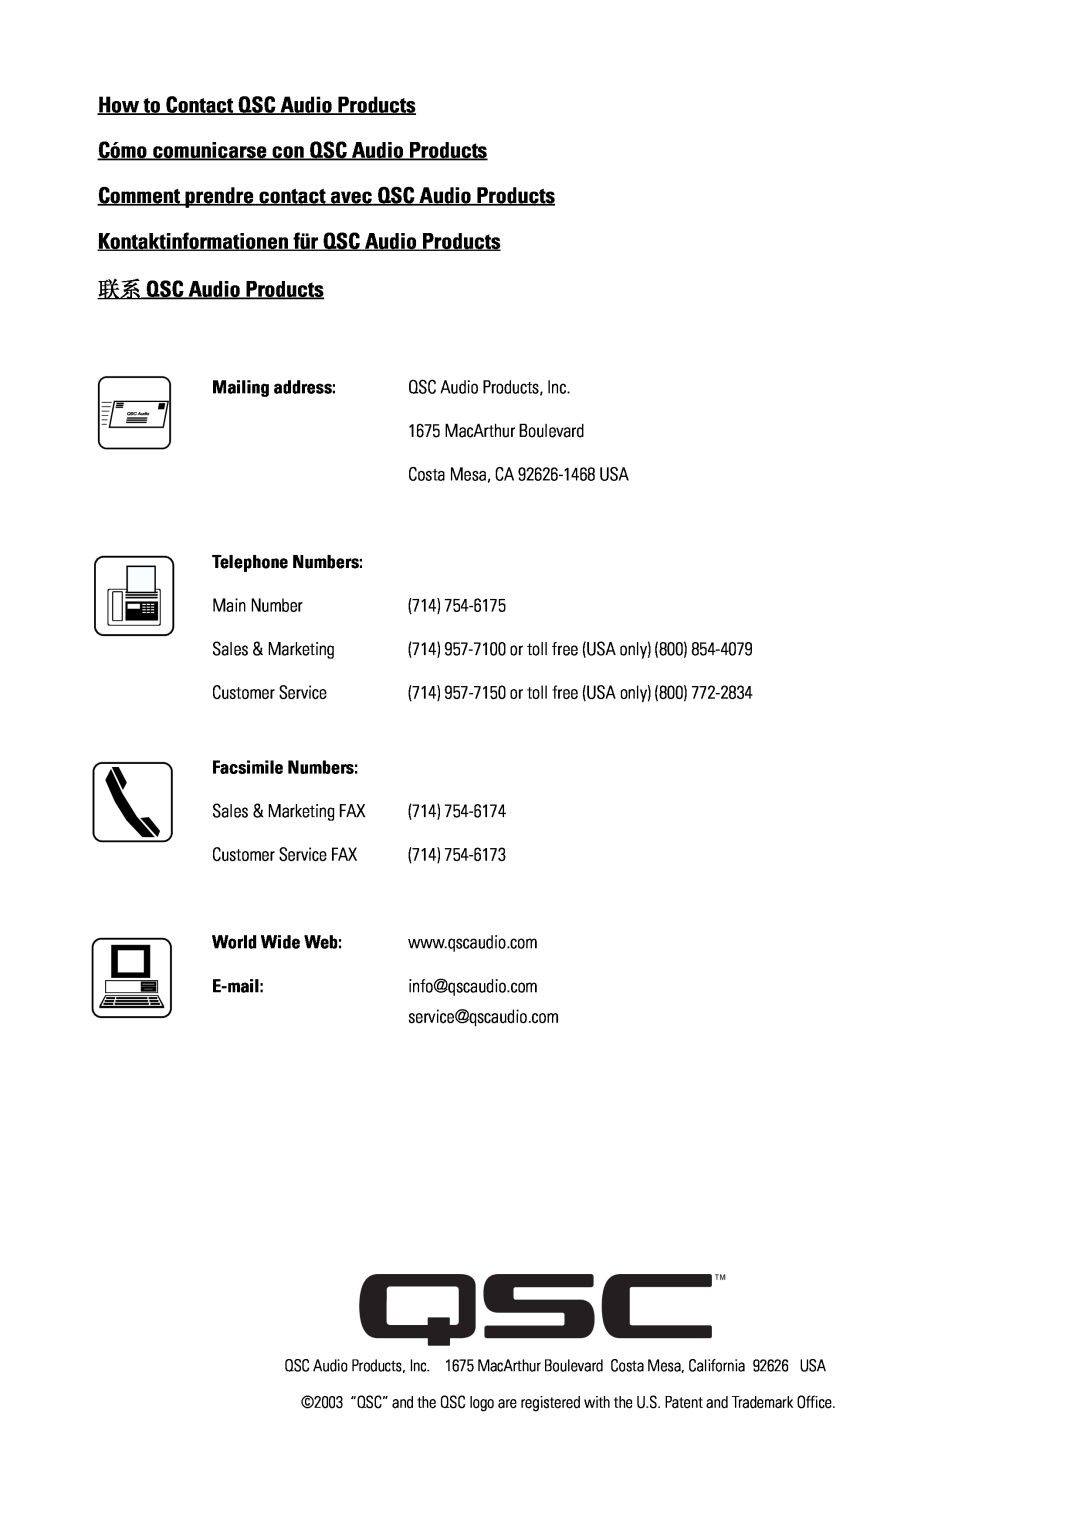 QSC Audio I-YM8, I-82H How to Contact QSC Audio Products, Cómo comunicarse con QSC Audio Products, 联系 QSC Audio Products 